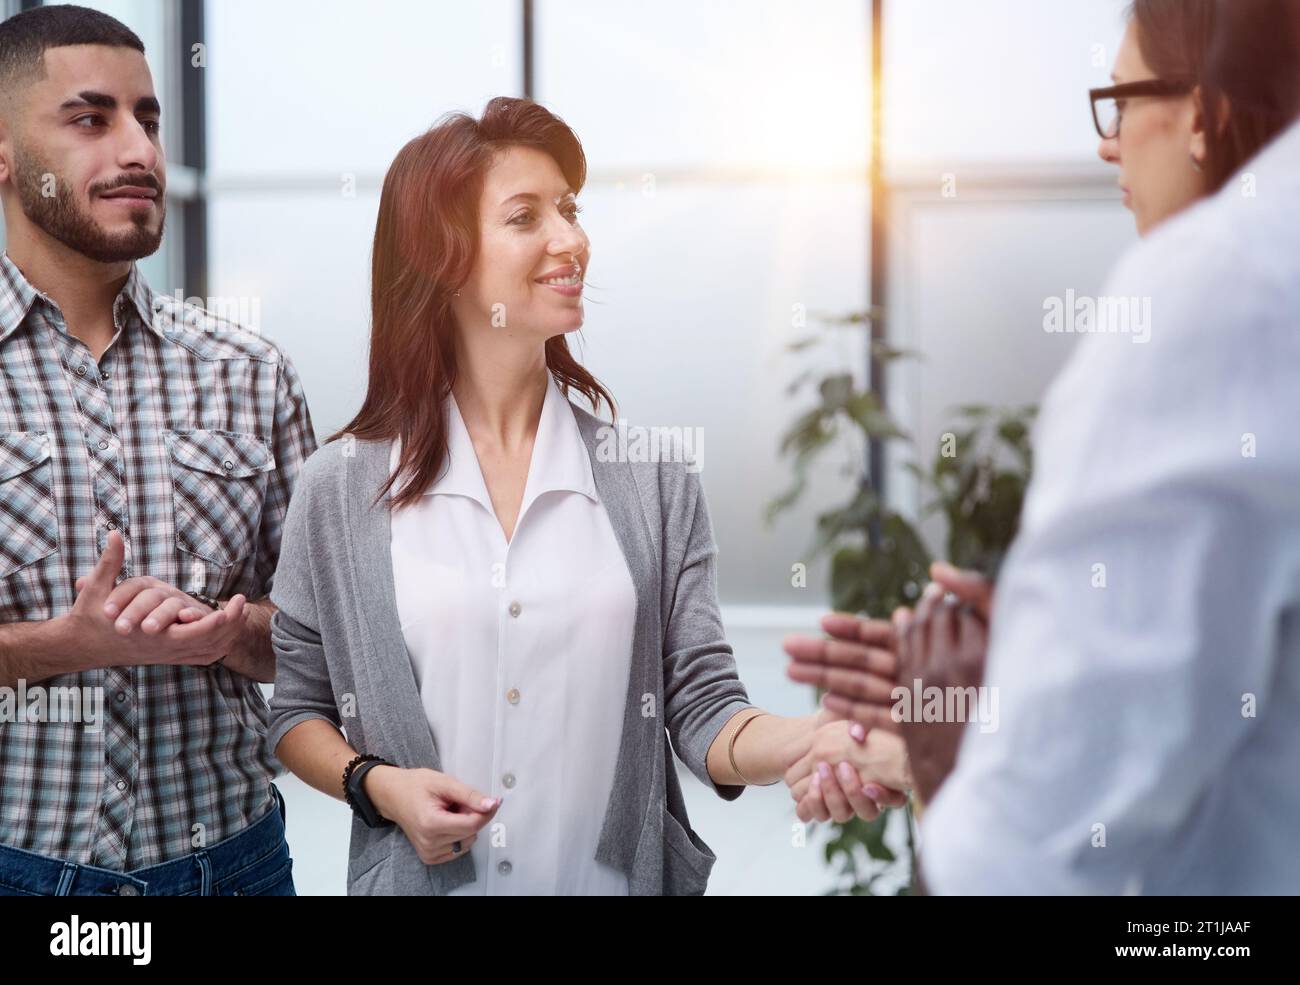 Business people standing and shaking hands in an office building Stock Photo